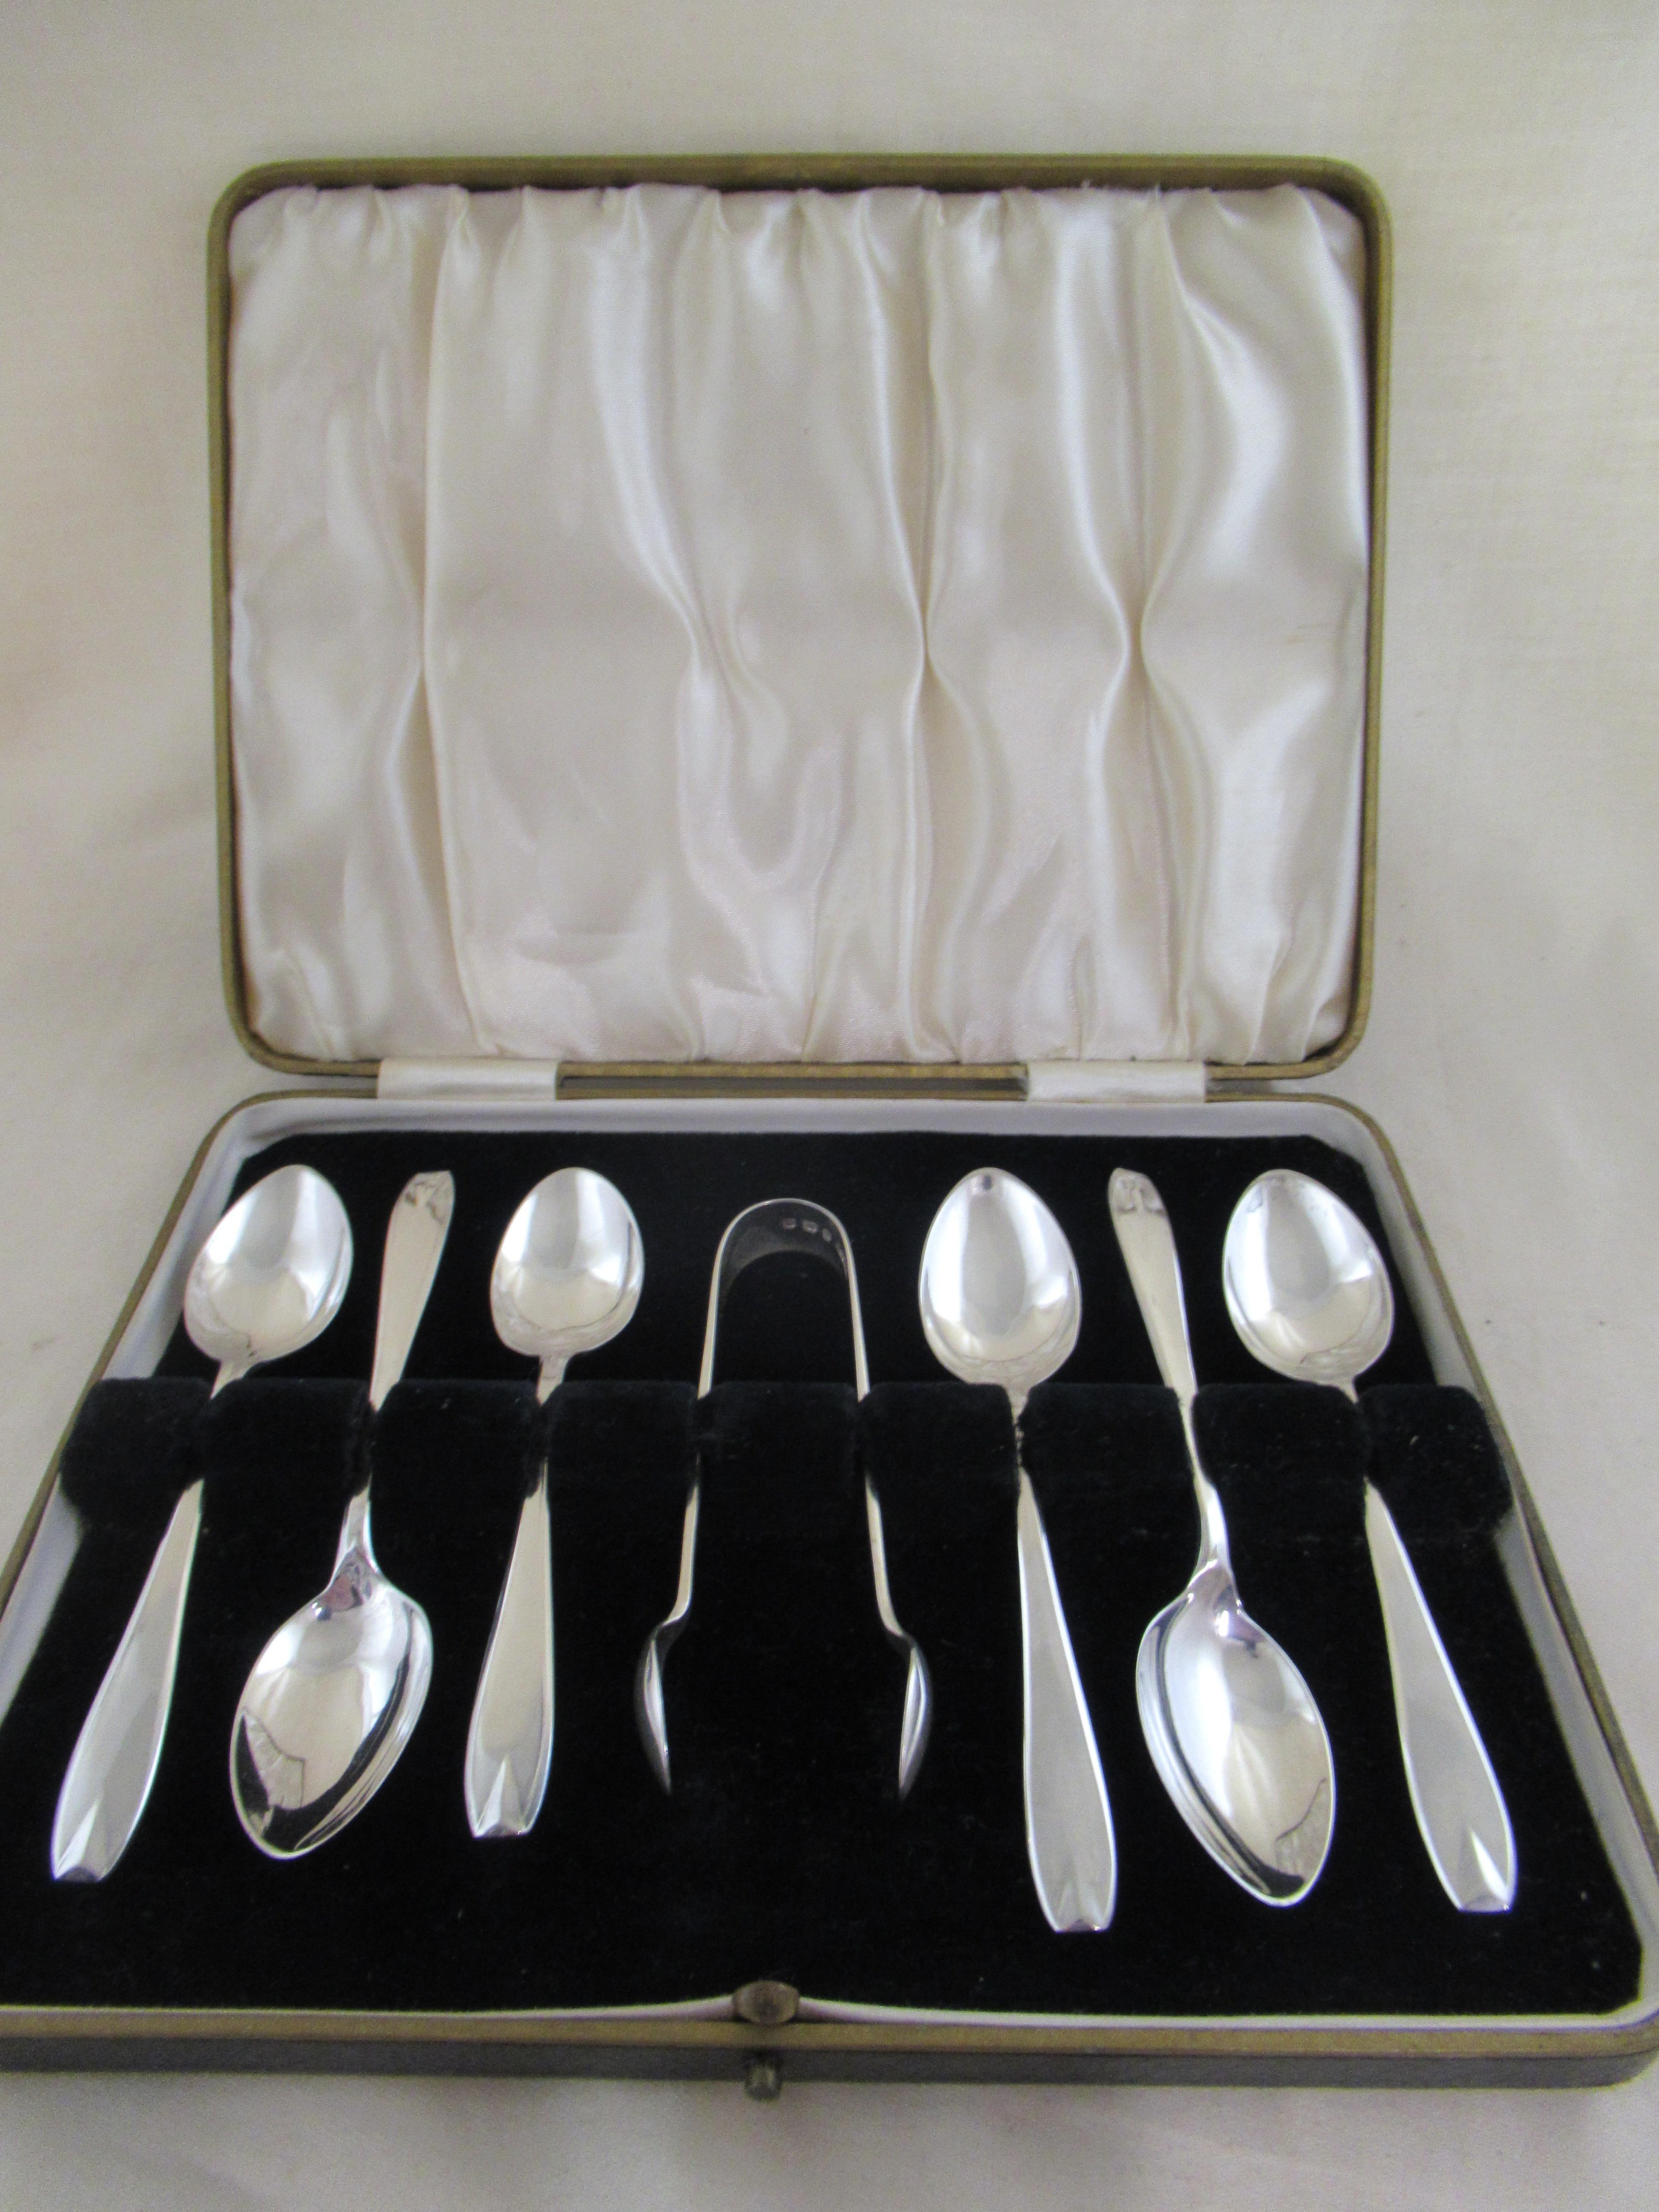 Sterling silver box of 6 Modern teaspoons + tongs
Made in England and with the maker`s mark - EV, for Emile Viner, for
Viners Ltd., bath street, Sheffield.
A full set of English hallmarks applied by the Sheffield Assay Office.
 Crown - mark for